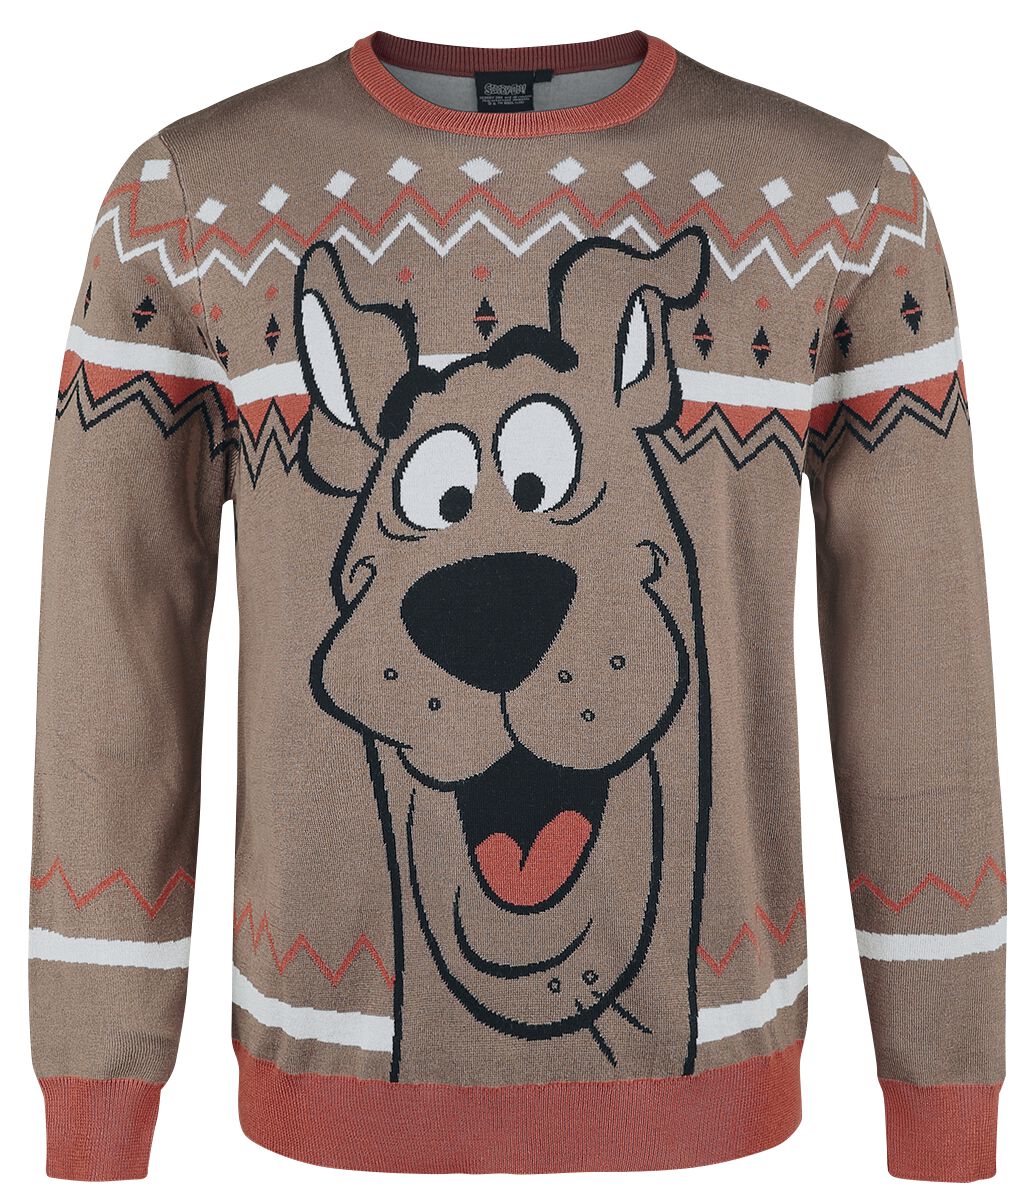 Scooby-Doo Scooby Christmas Christmas jumper brown